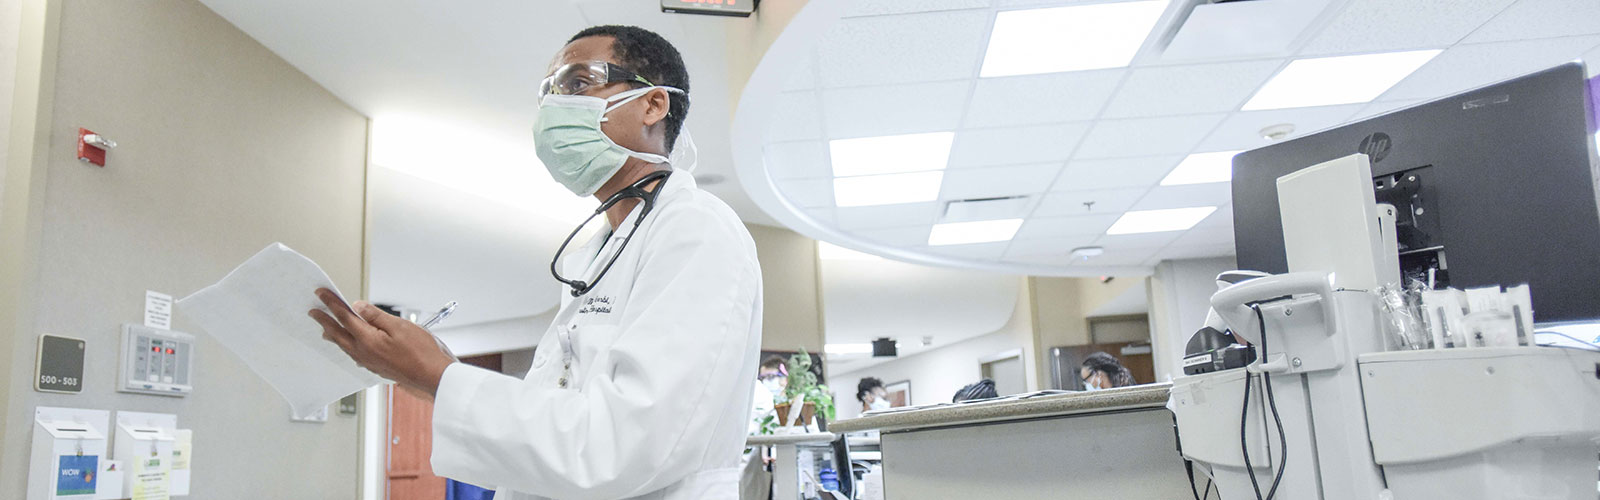 The next generation of advanced medicine is taking root at Atrium Health.